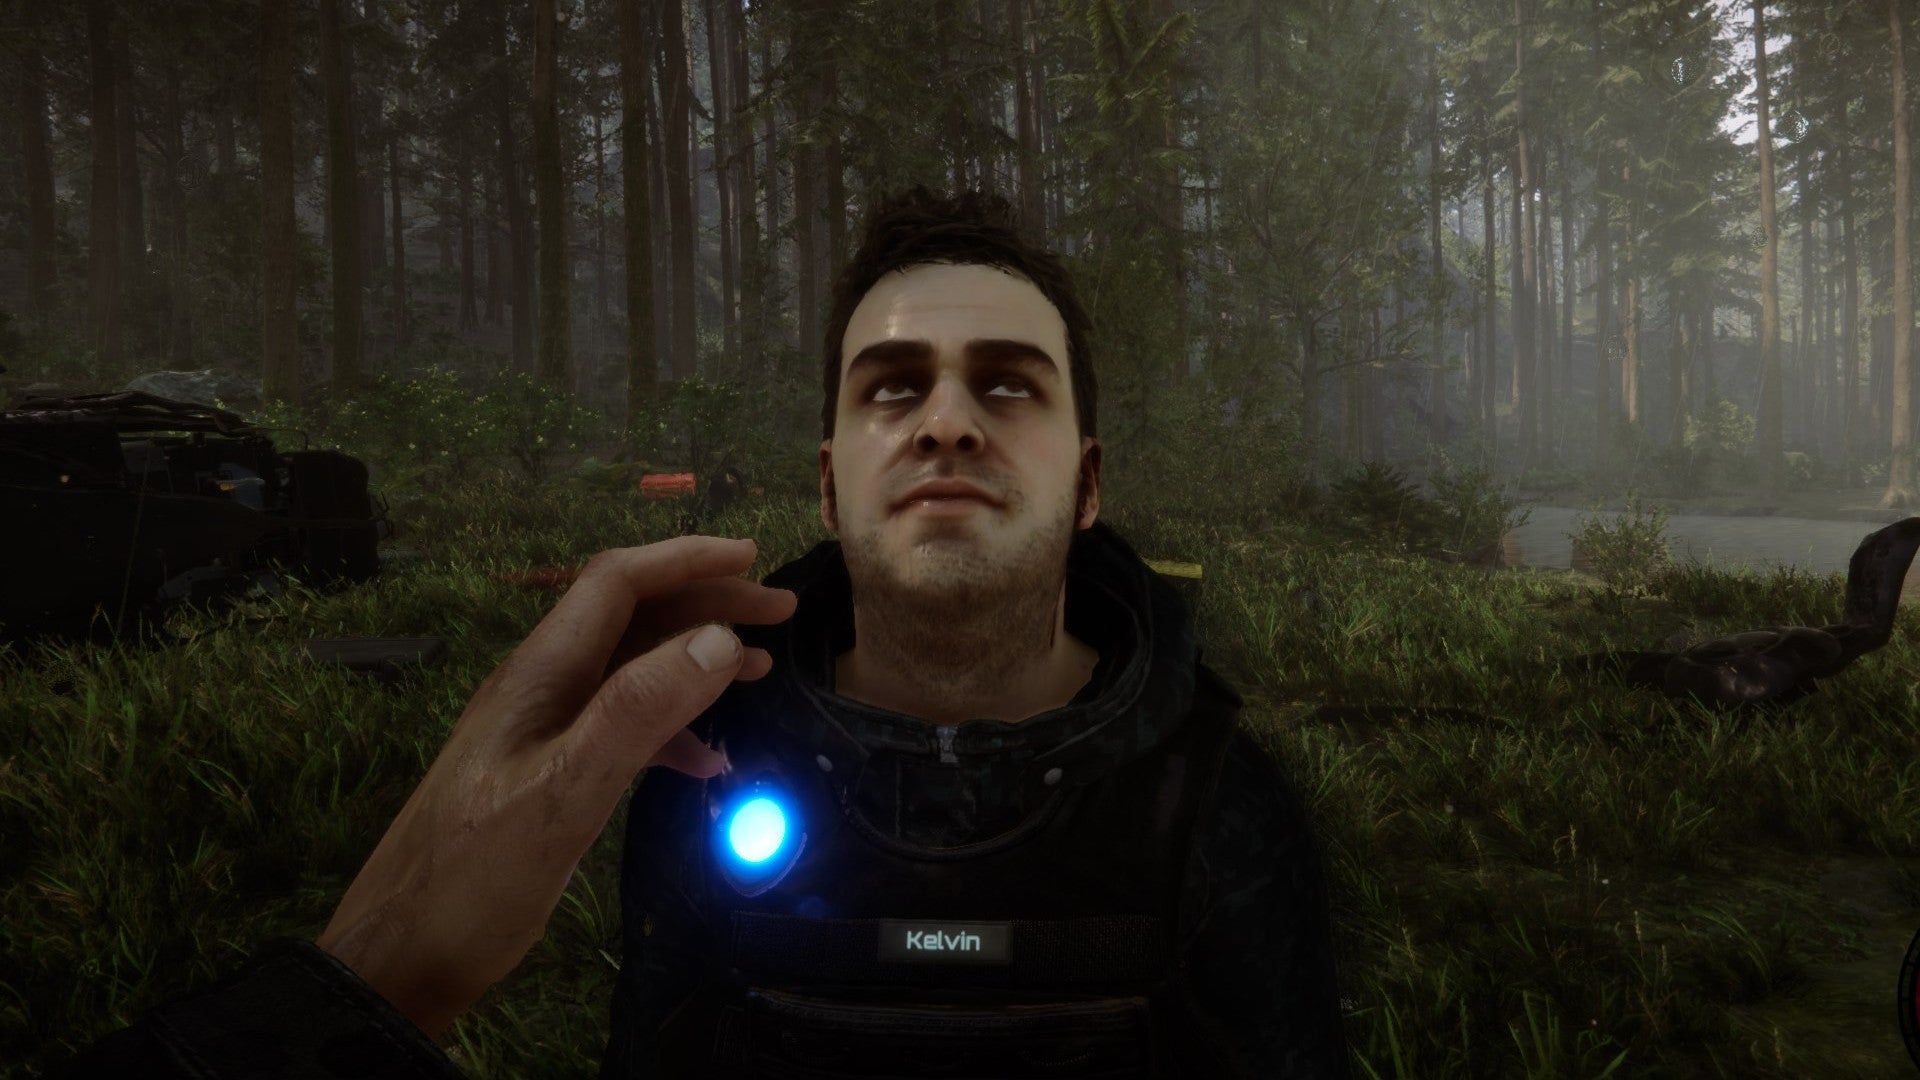 The player waves at Kelvin as he stands dazed in Sons of the Forest.